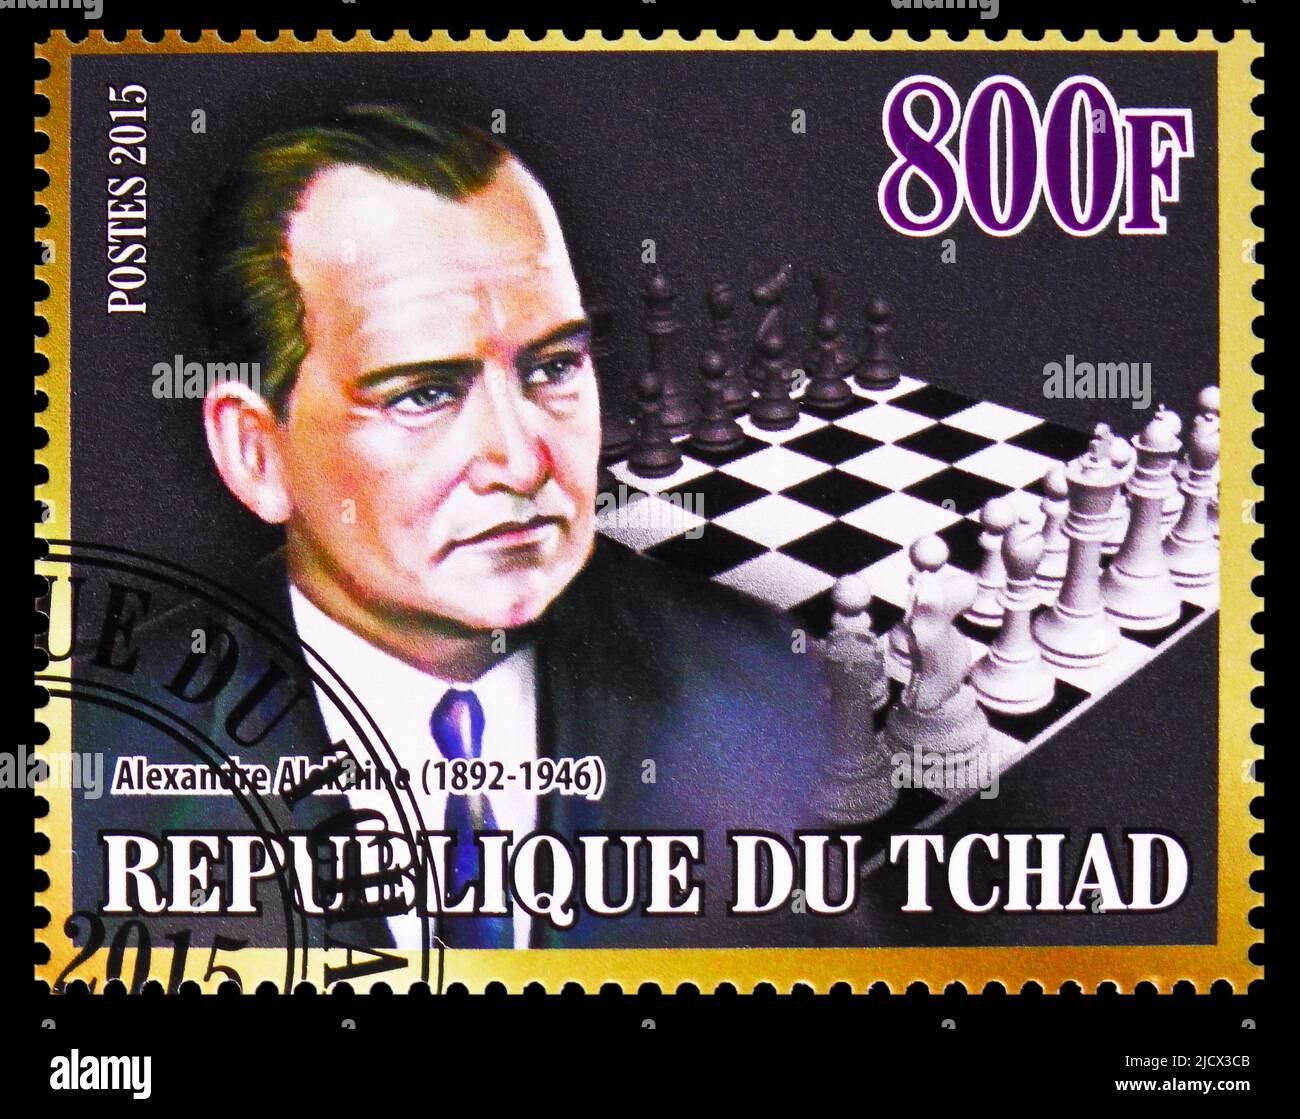 Alekhine Chess Champion 4' Poster, picture, metal print, paint by